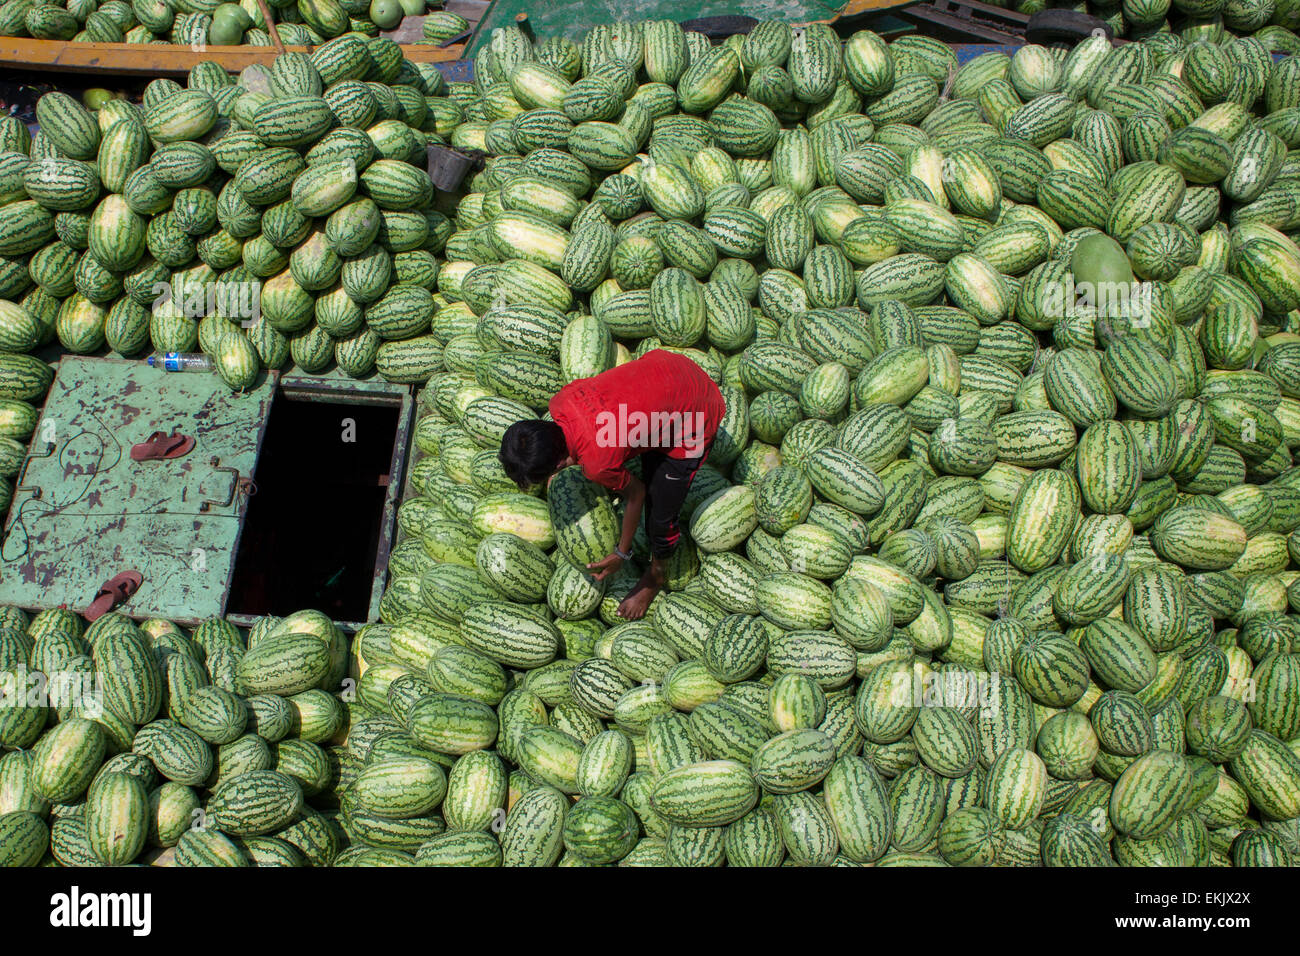 Dhaka, Bangladesh. 10th Apr, 2015. Bangladeshi laborers unload watermelon from boats at Sadarghat in Dhaka.Bumper production of watermelon in Bangladesh this season. Experts have said that the good quality watermelons were a bumper harvest this year owing to favoring weather and improved farming. Credit:  zakir hossain chowdhury zakir/Alamy Live News Stock Photo